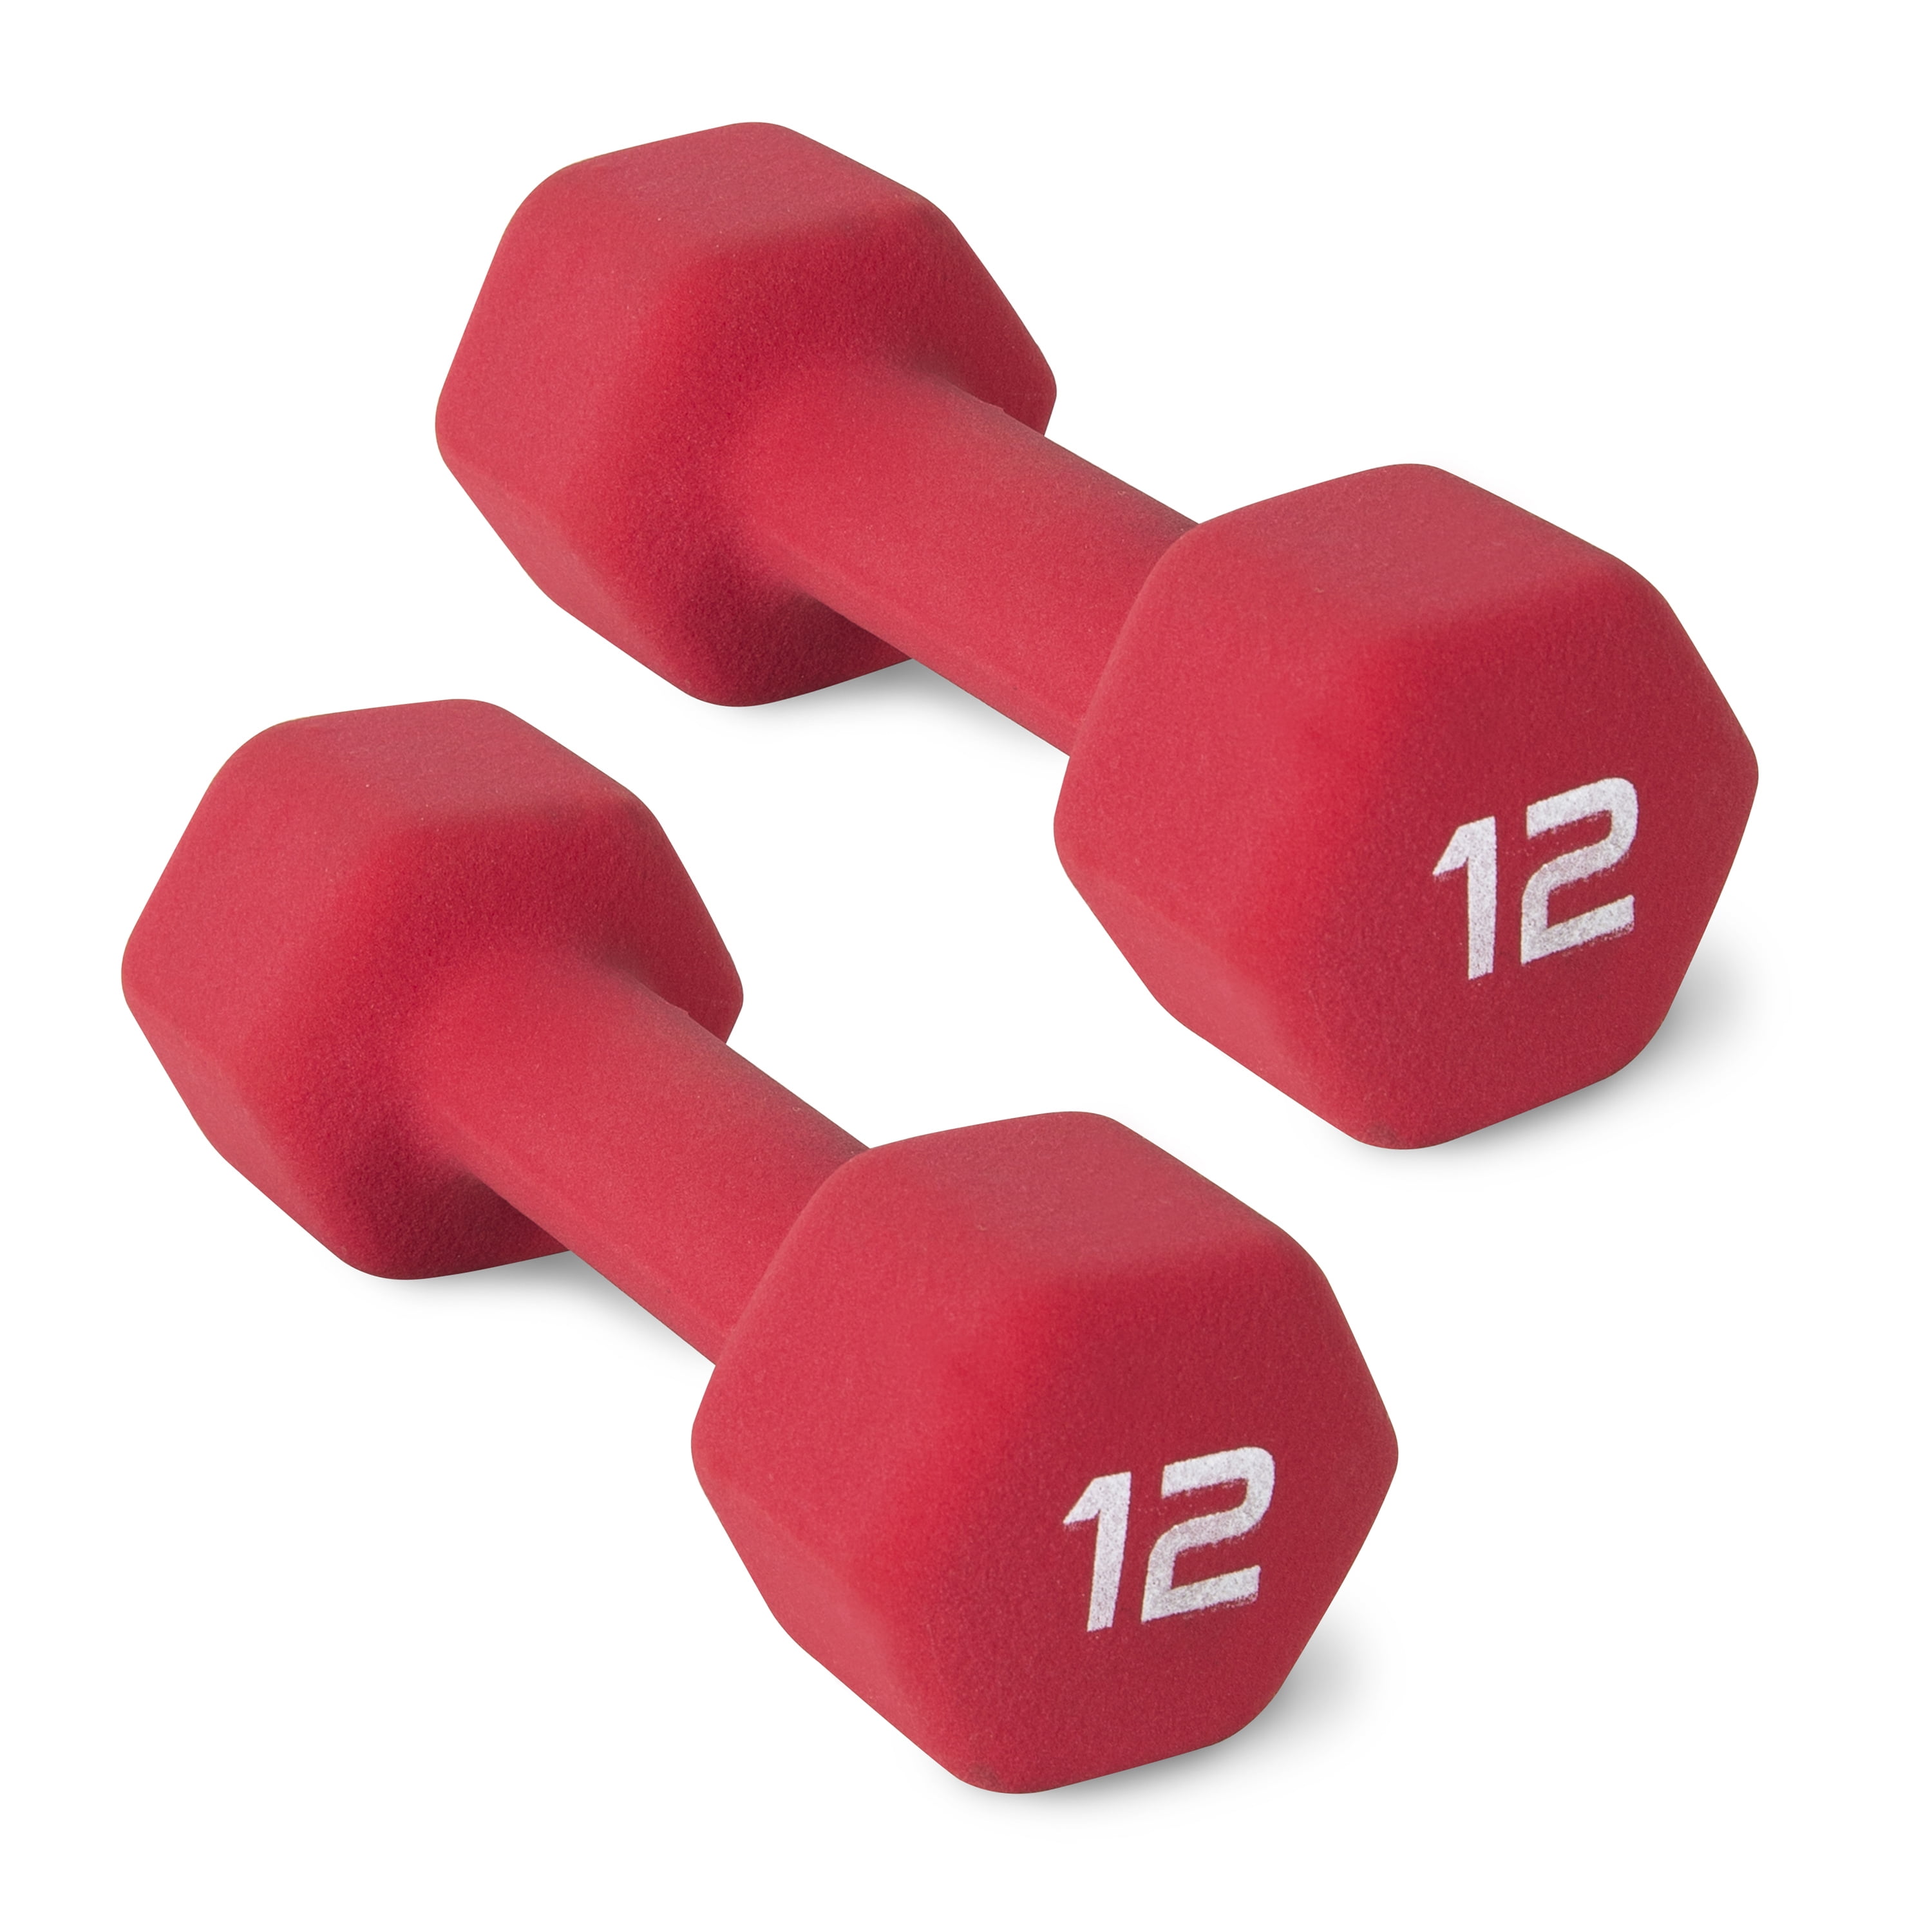 Details about   Cap Hex Neoprene Dumbbells Weights 8LB 10LB One Pair pick your own bundle 